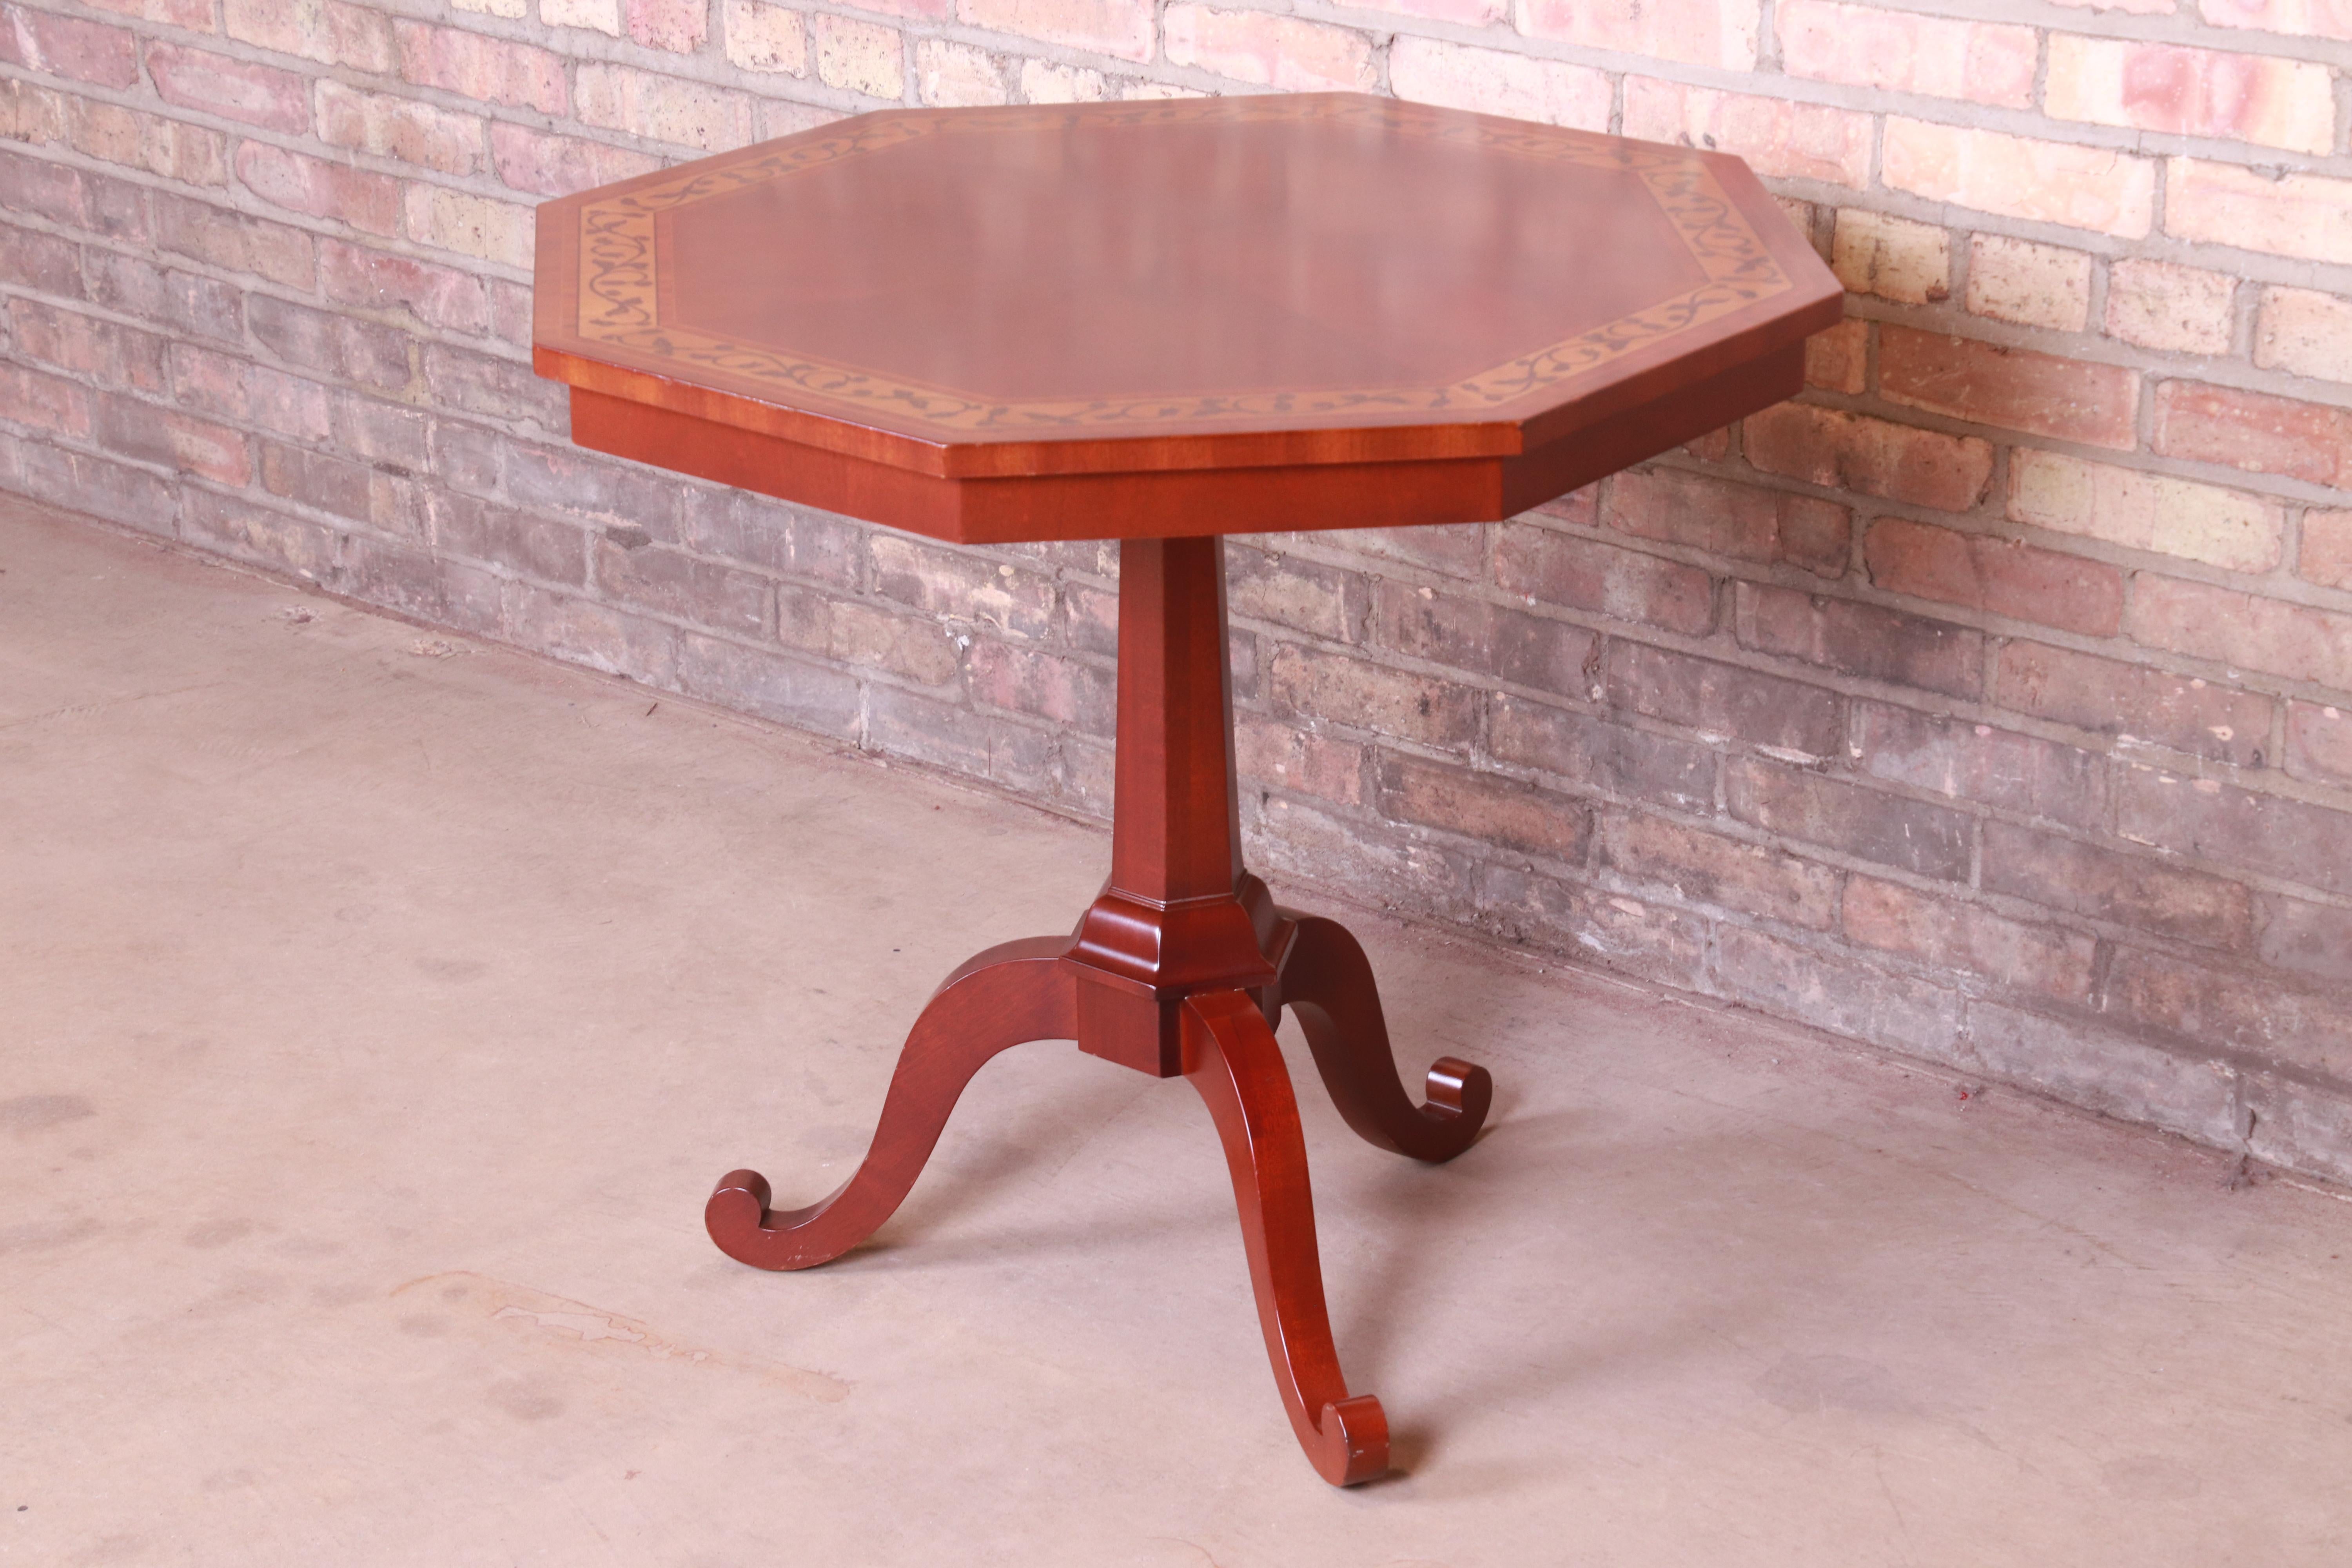 A gorgeous Regency style pedestal tea table or occasional side table

By Kindel Furniture

USA, circa 1980s

Bookmatched mahogany in starburst pattern, with inlaid satinwood banding with floral design.

Measures: 30